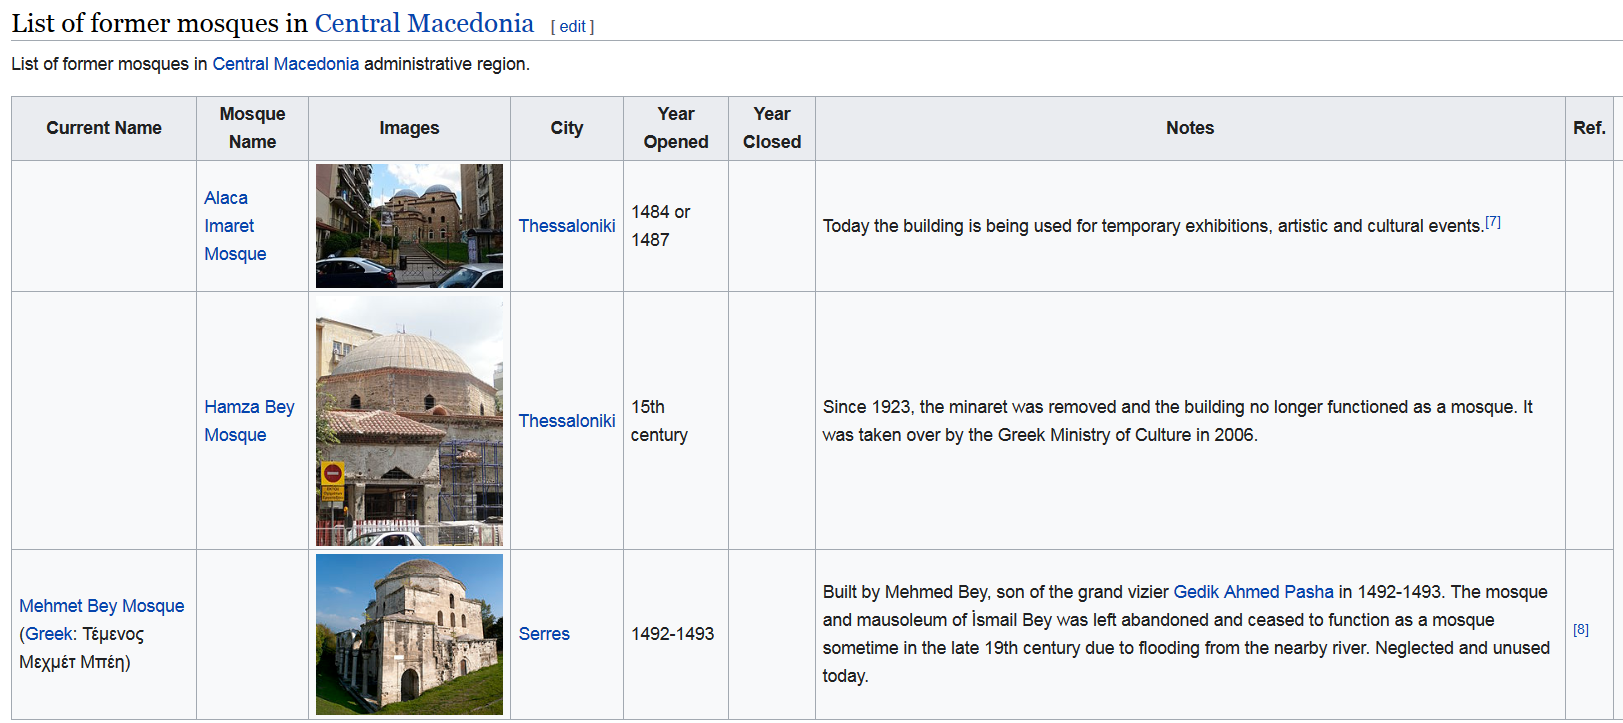 Screenshot_2022-04-06 List of former mosques in Greece - Wikipedia(1).png